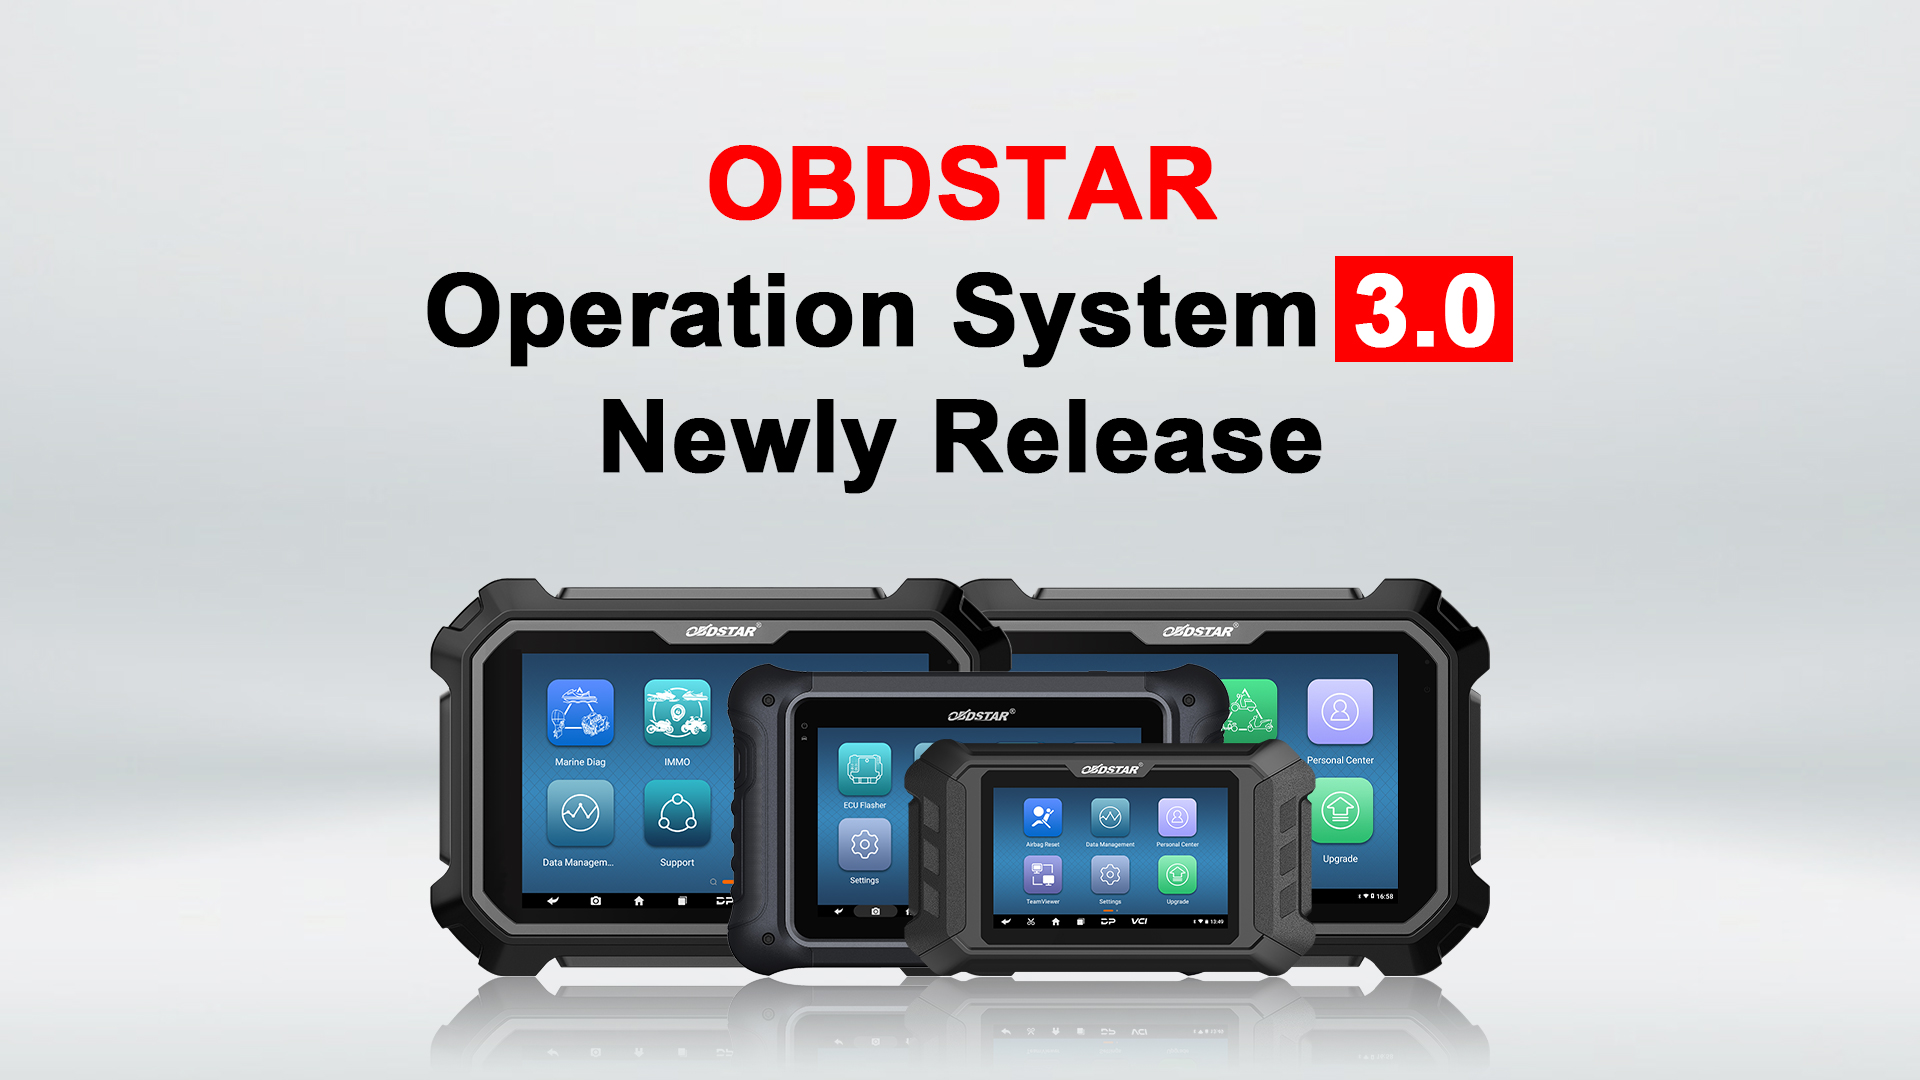 OBDSTAR Operation System 3.0 Newly Release!